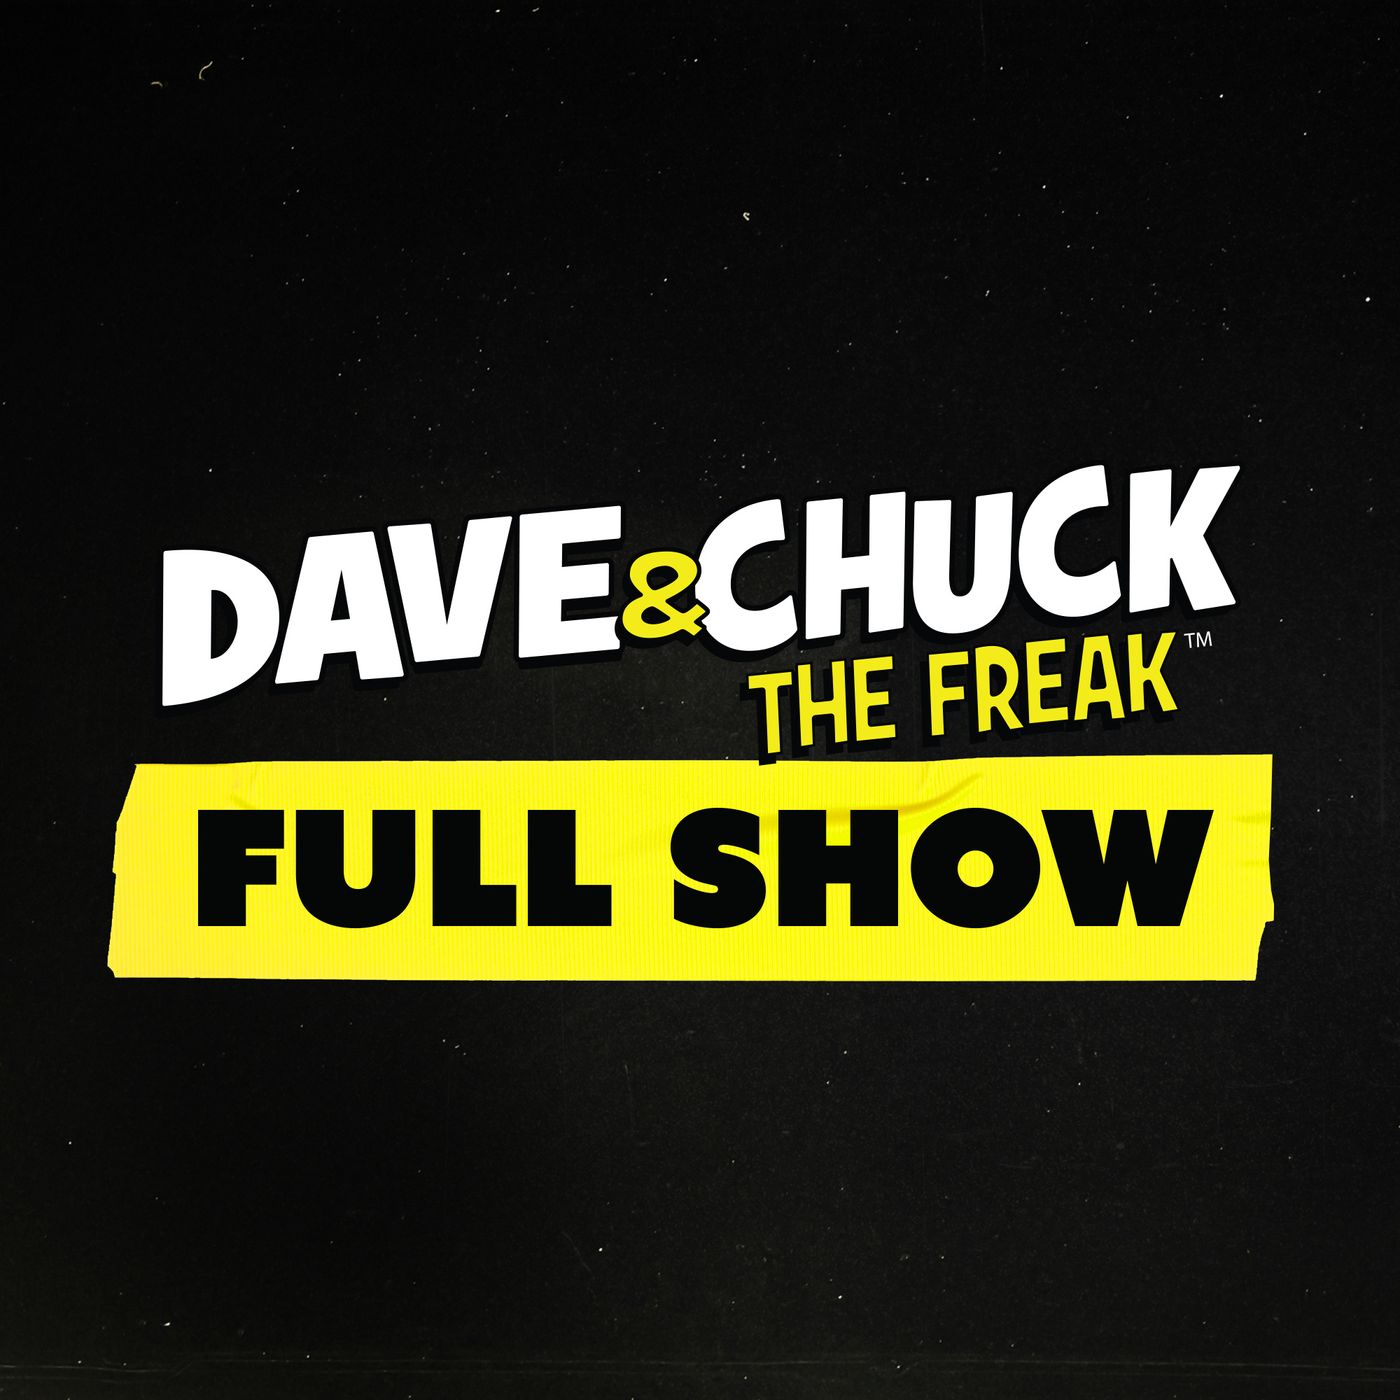 Tuesday, May 9th 2023 Dave & Chuck the Freak Full Show